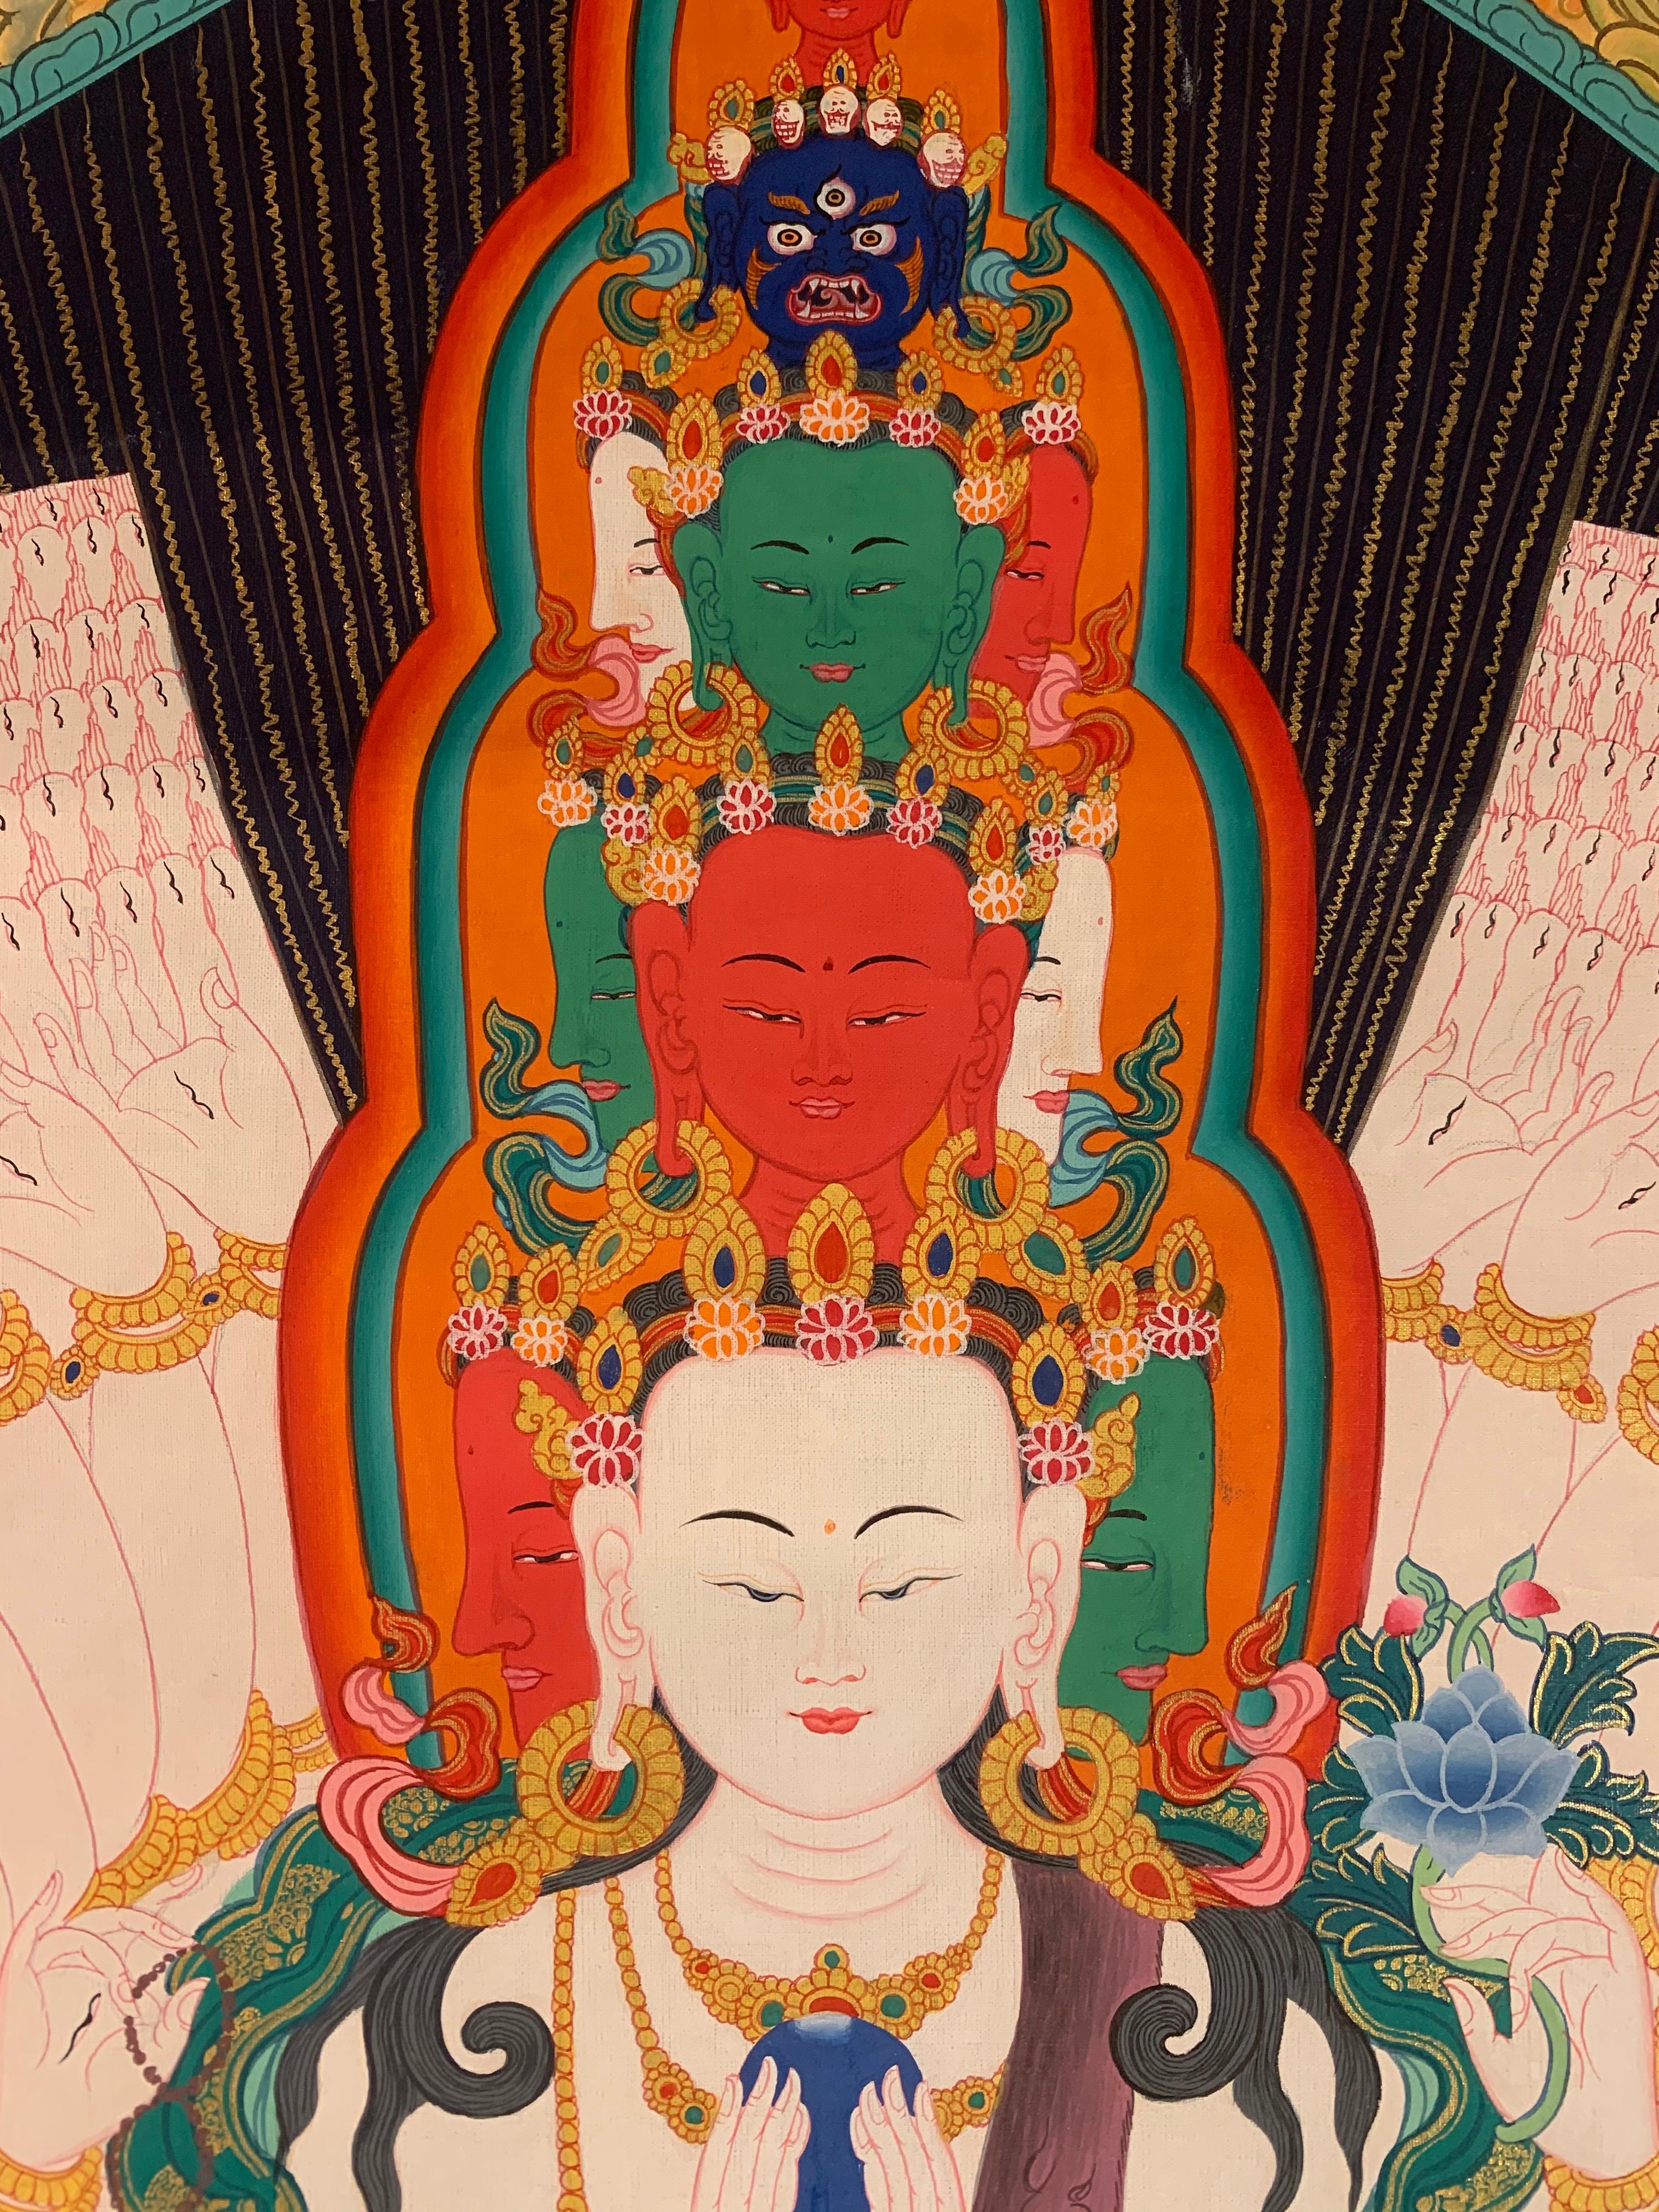 Unframed Hand Painted Thousand-armed Avalokitesvara Thangka on Canvas with Gold - Other Art Style Painting by Unknown